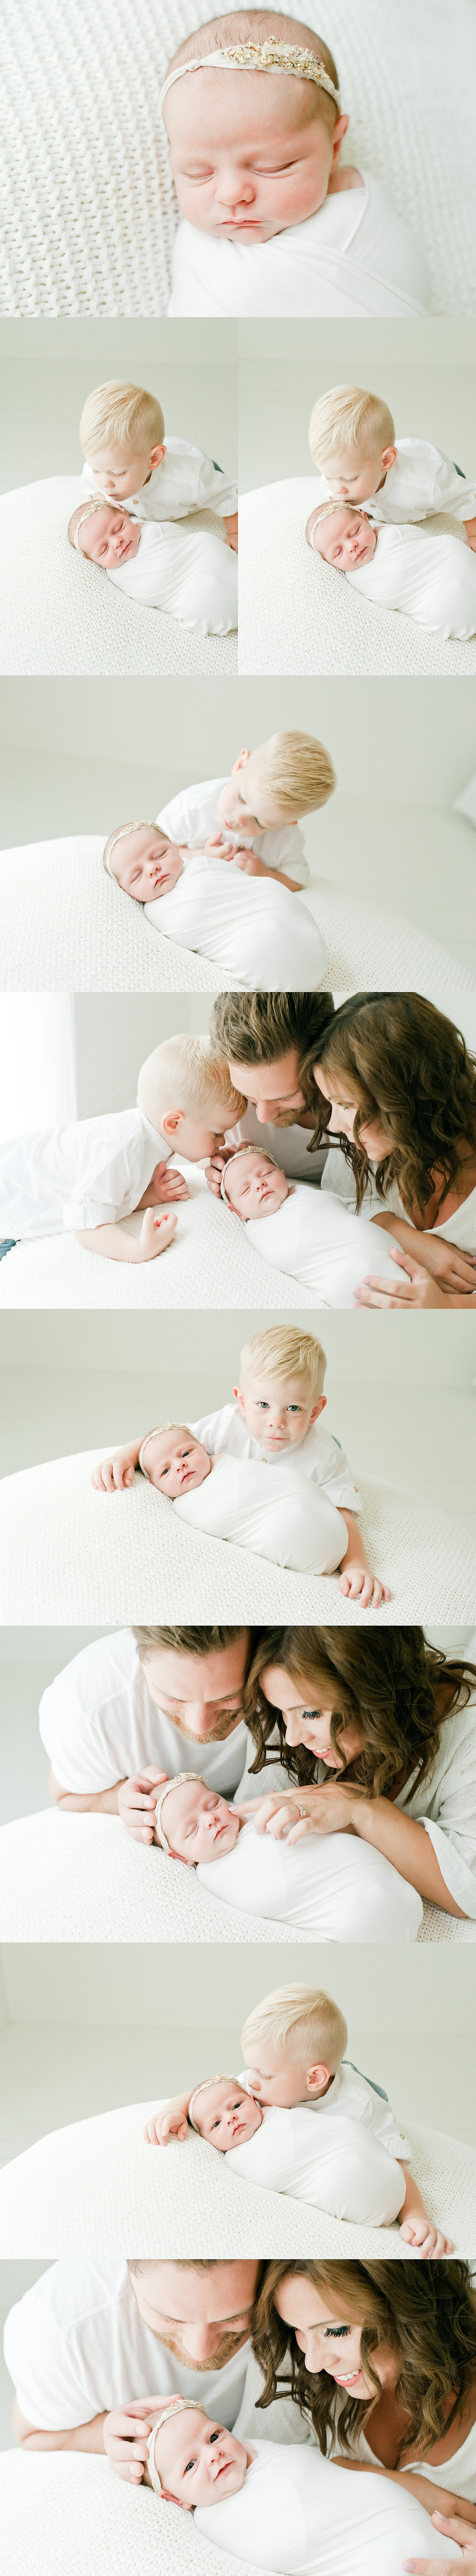 family photos in newborn session